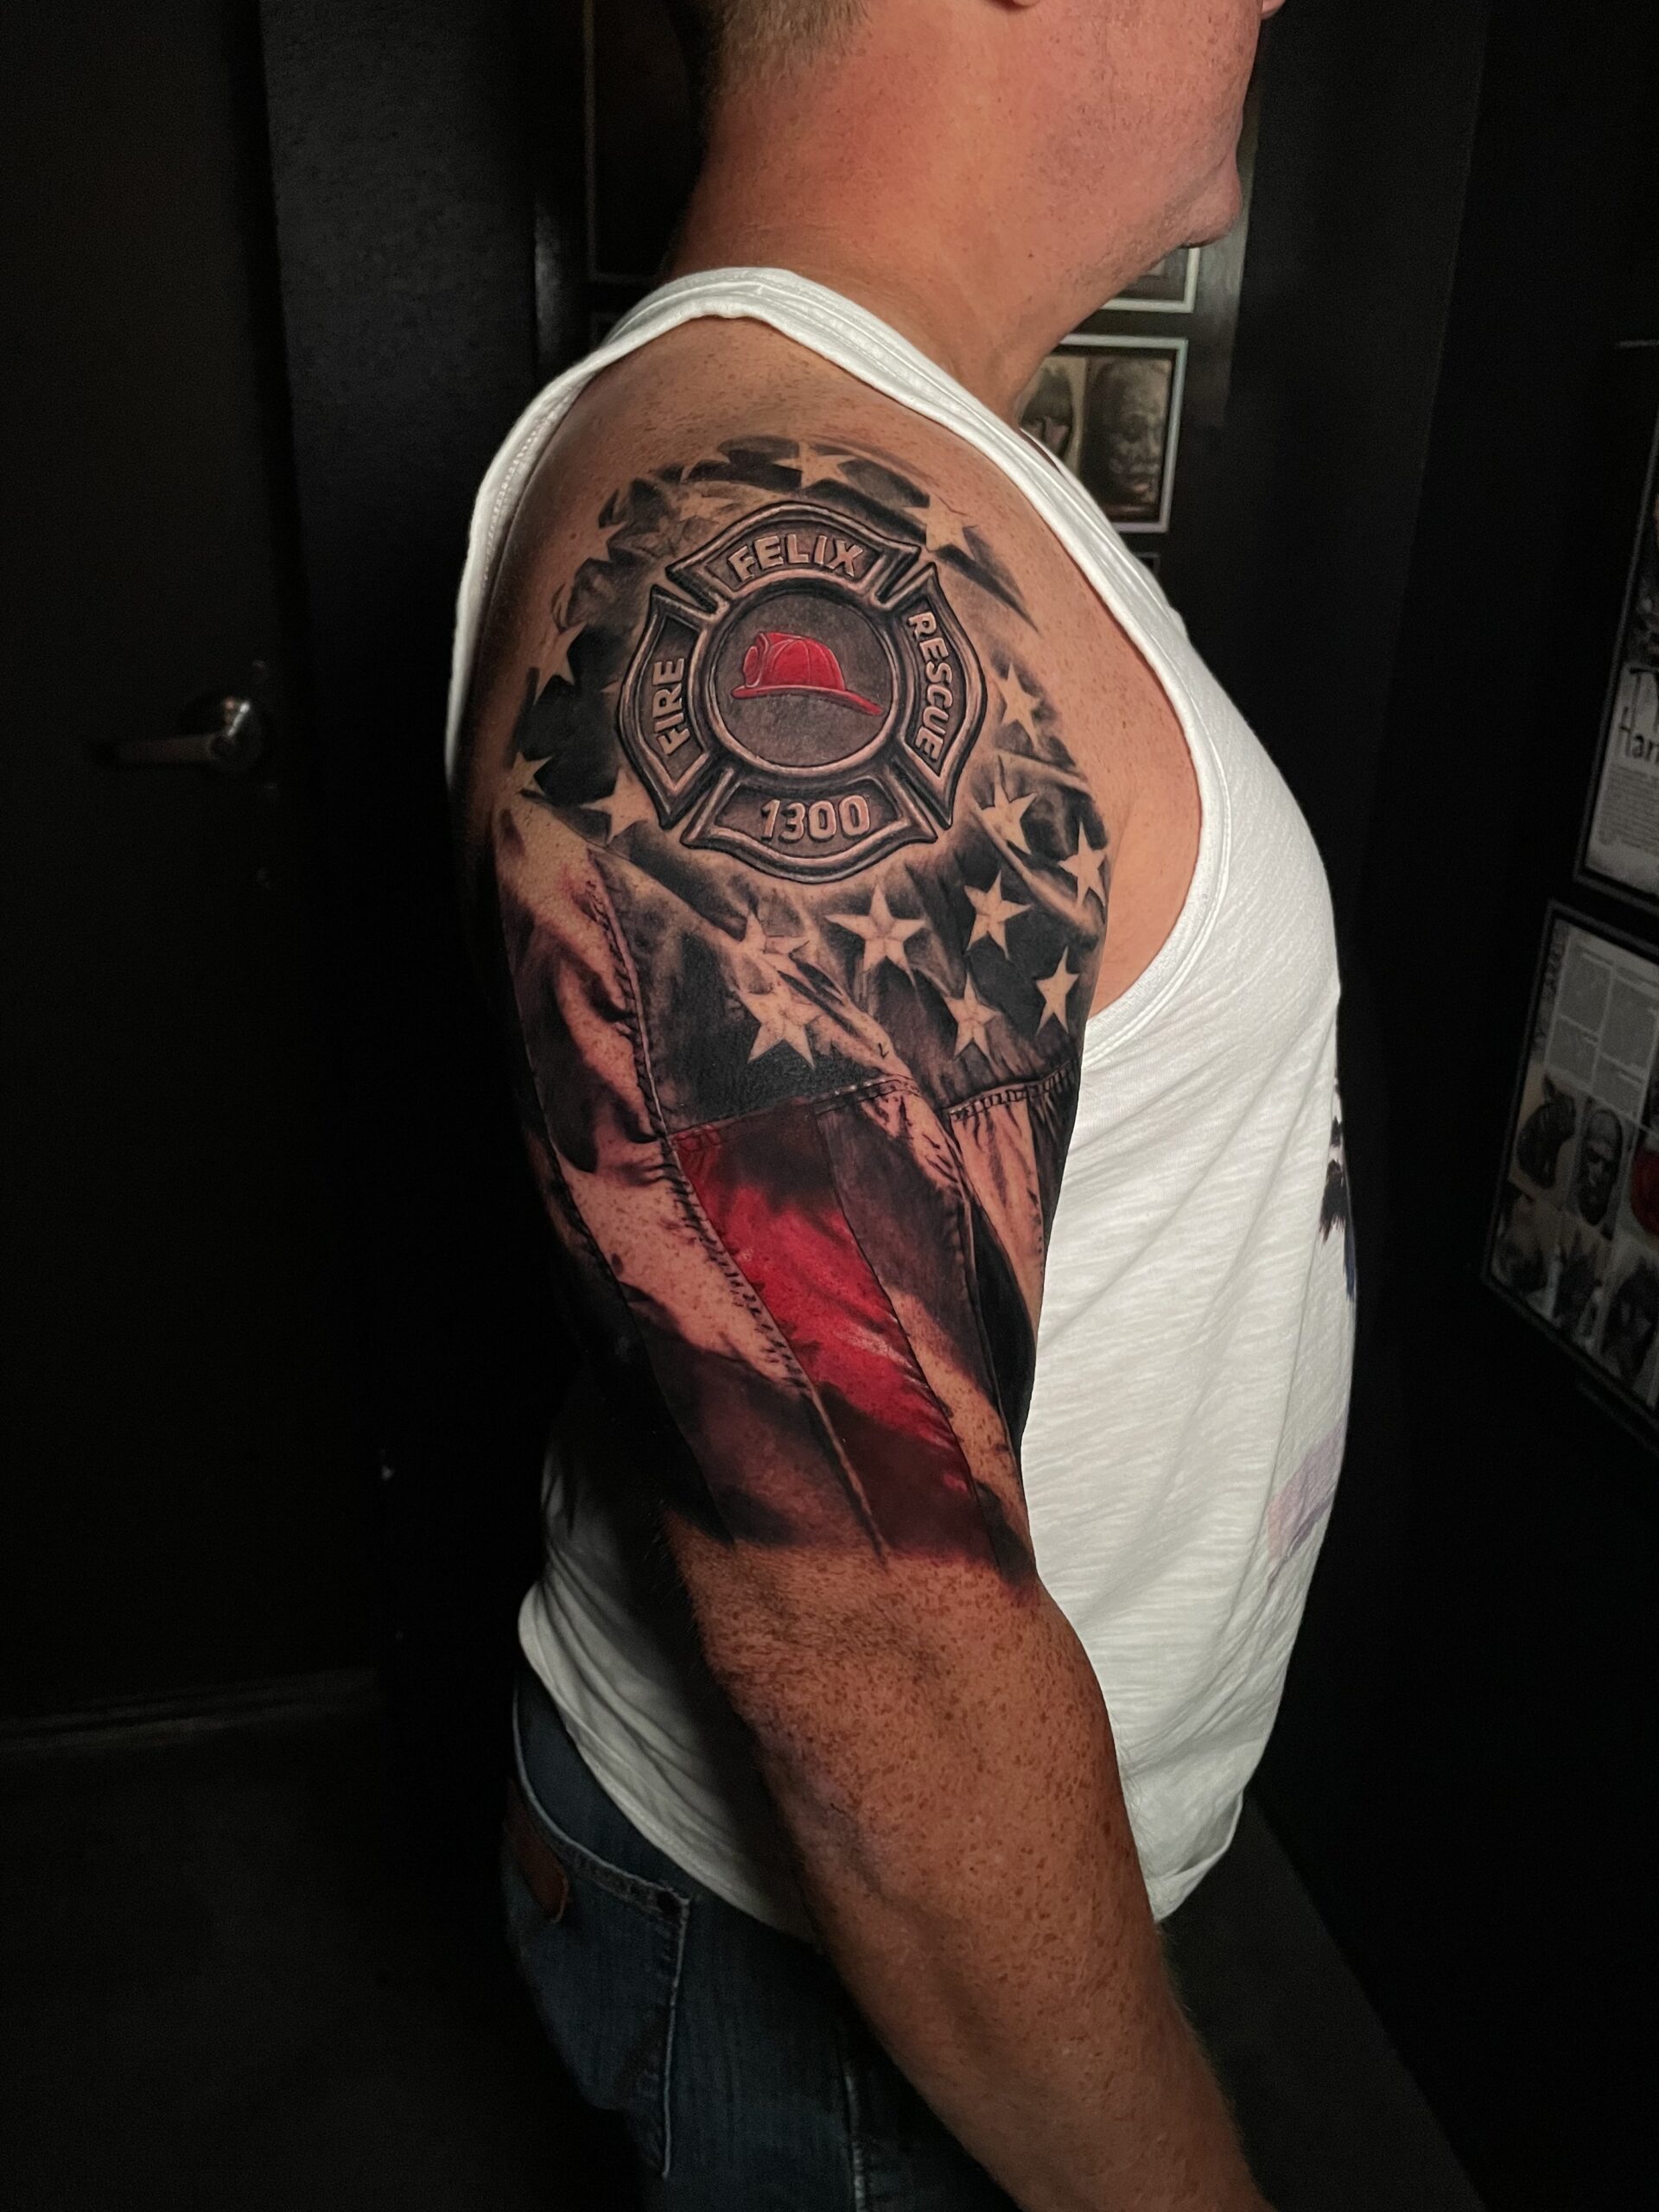 Firefighter symbol and American flag tattoo - a tribute to bravery and patriotism